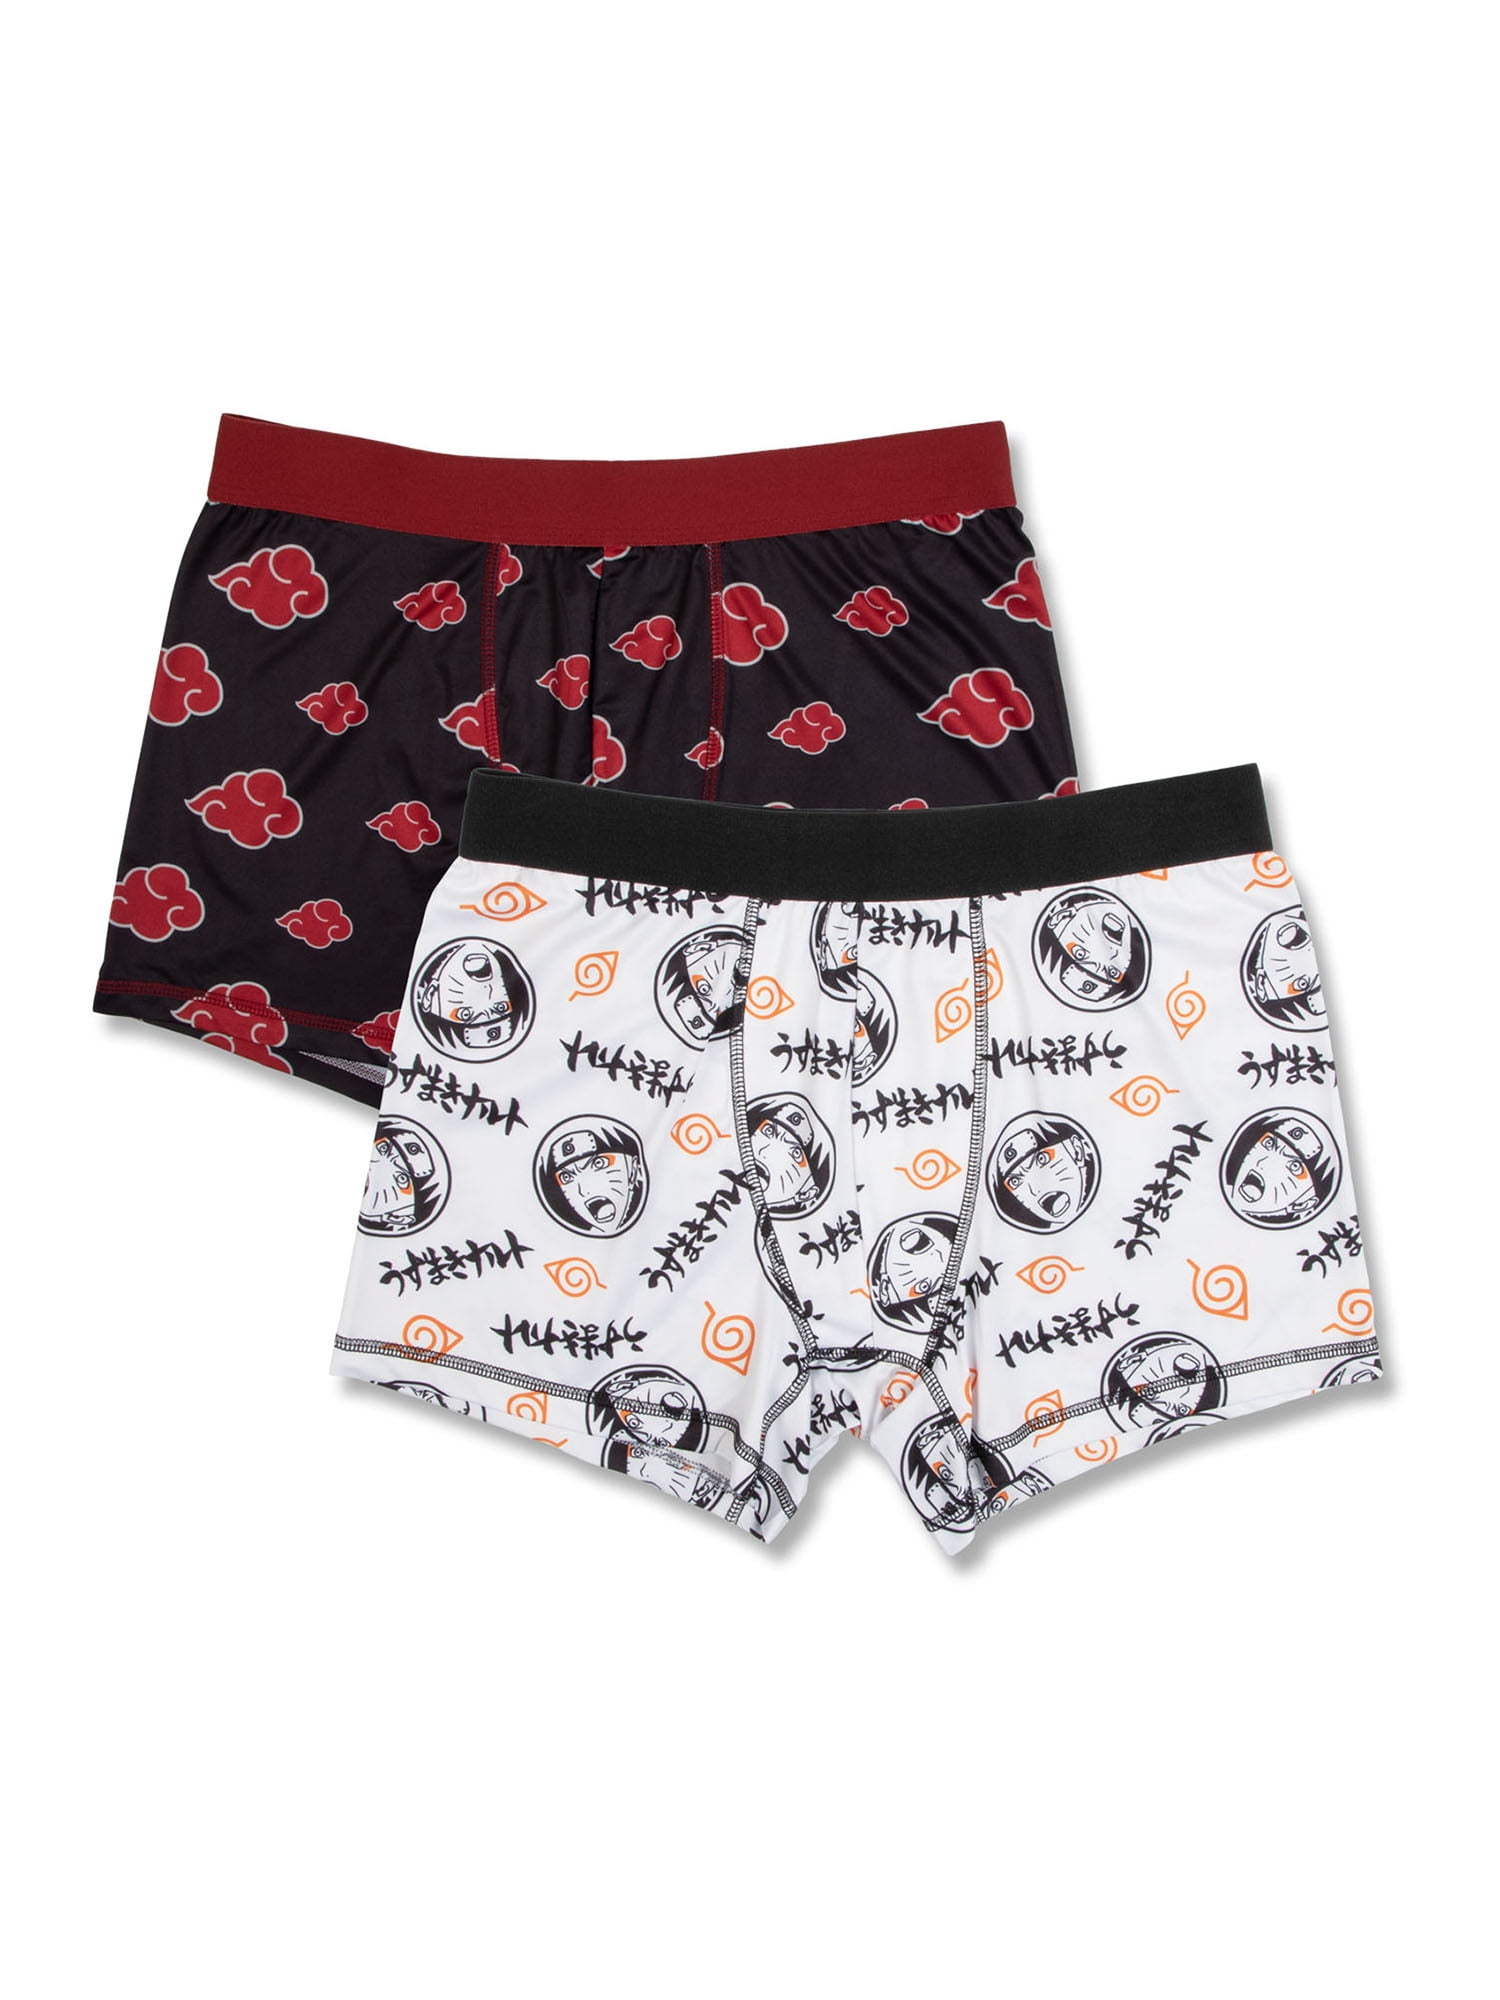 Anime Men's Boxer Briefs Soft Underwear for Mens and Boys